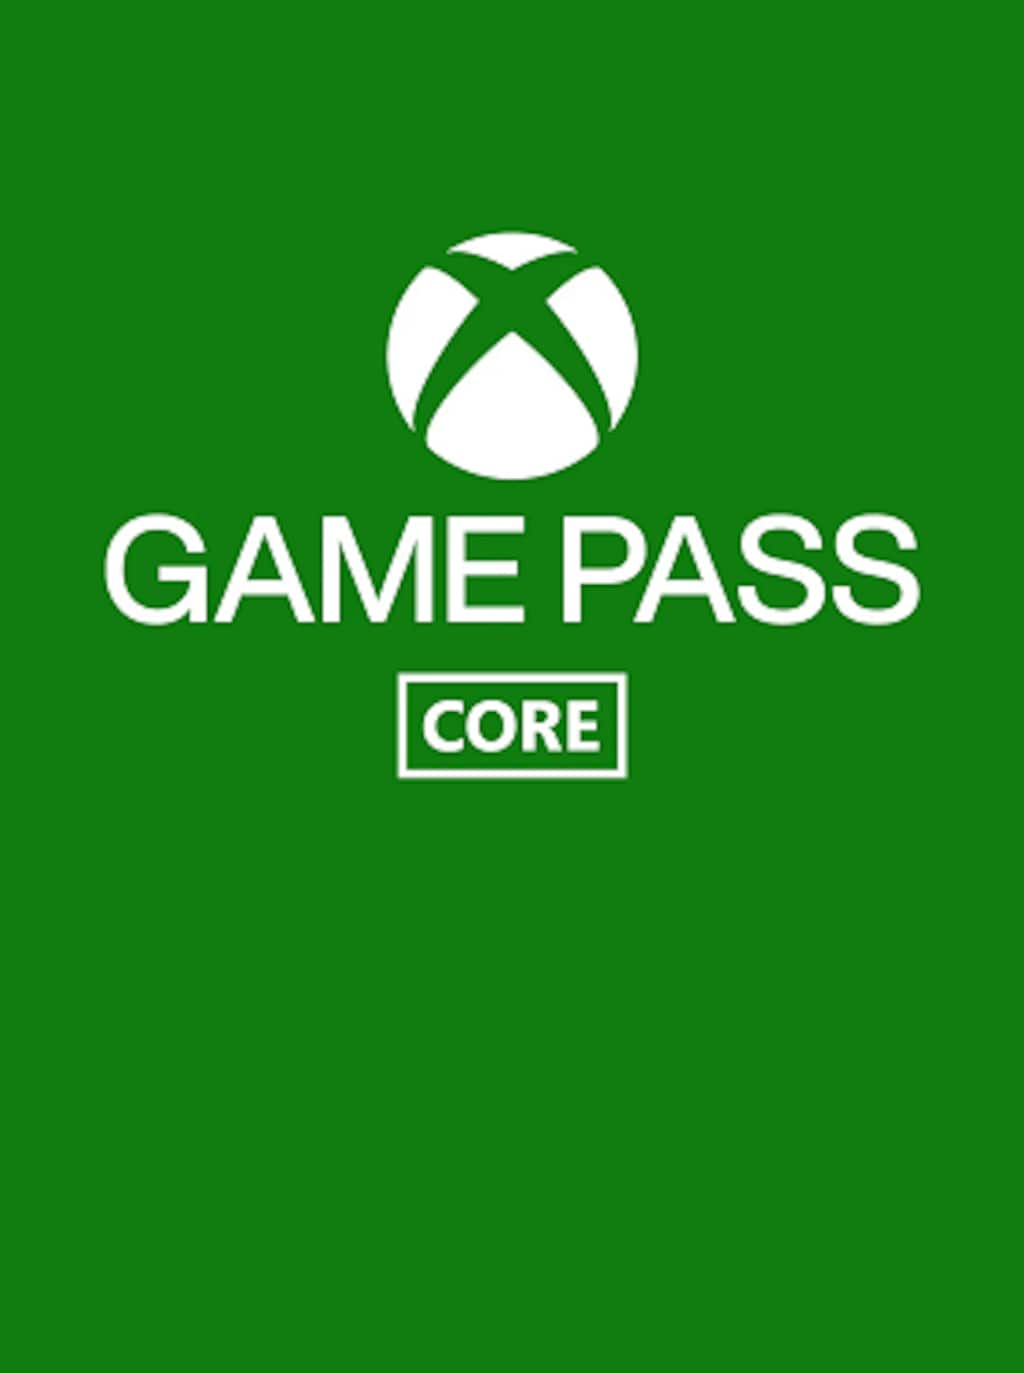 MICROSOFT XBOX ULTIMATE GAME PASS + LIVE GOLD - GLOBAL CODE - FAST